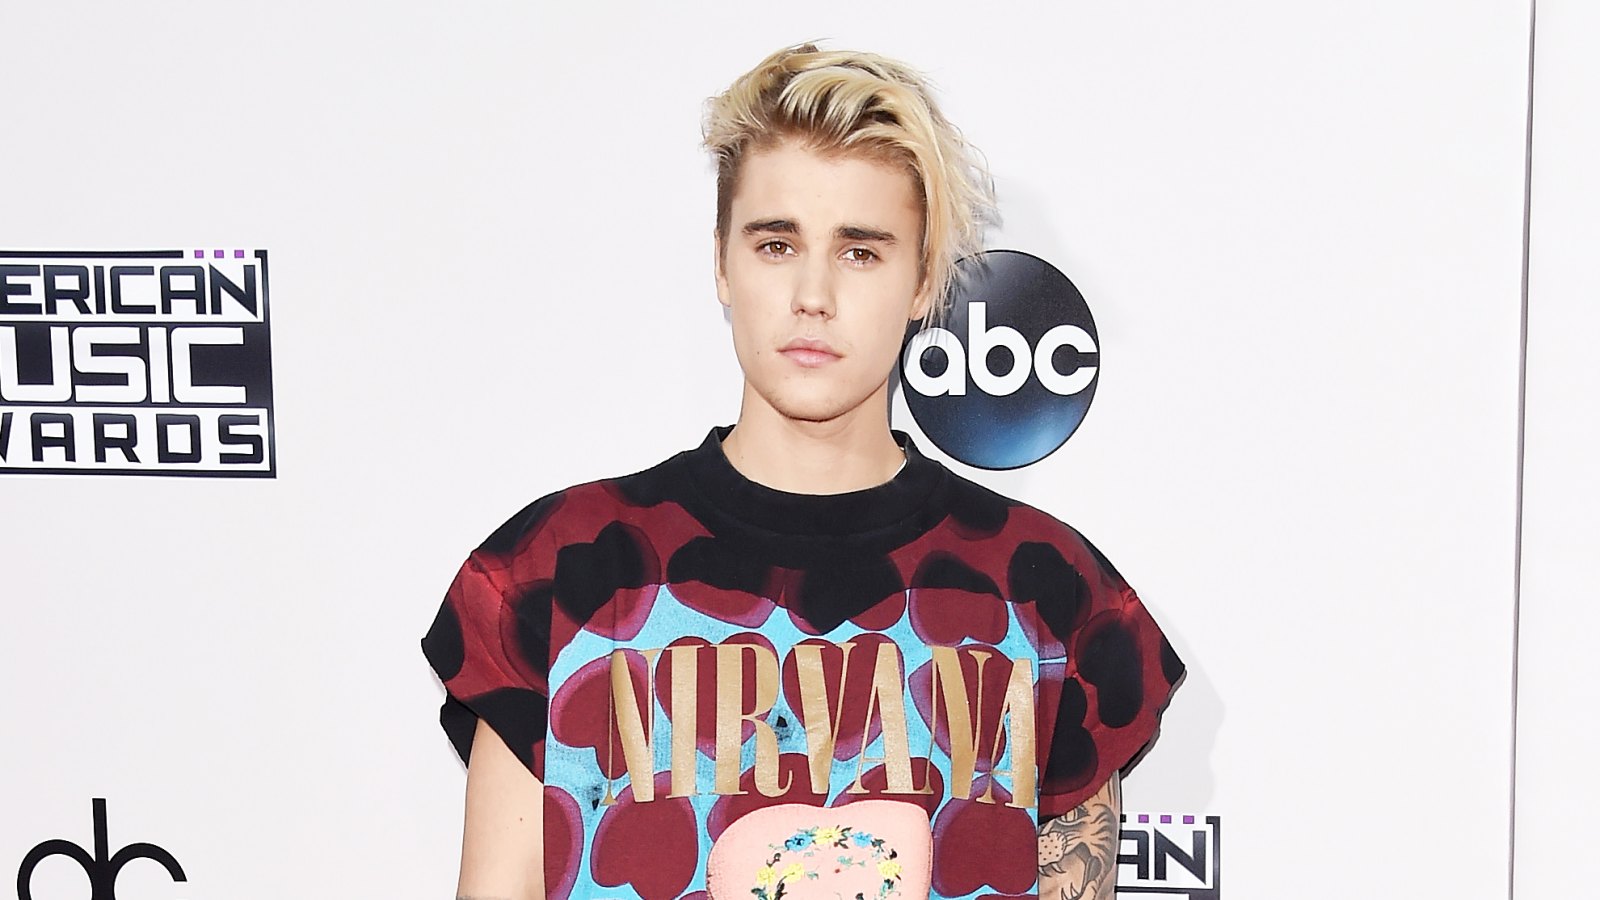 Justin Bieber at the 2015 American Music Awards